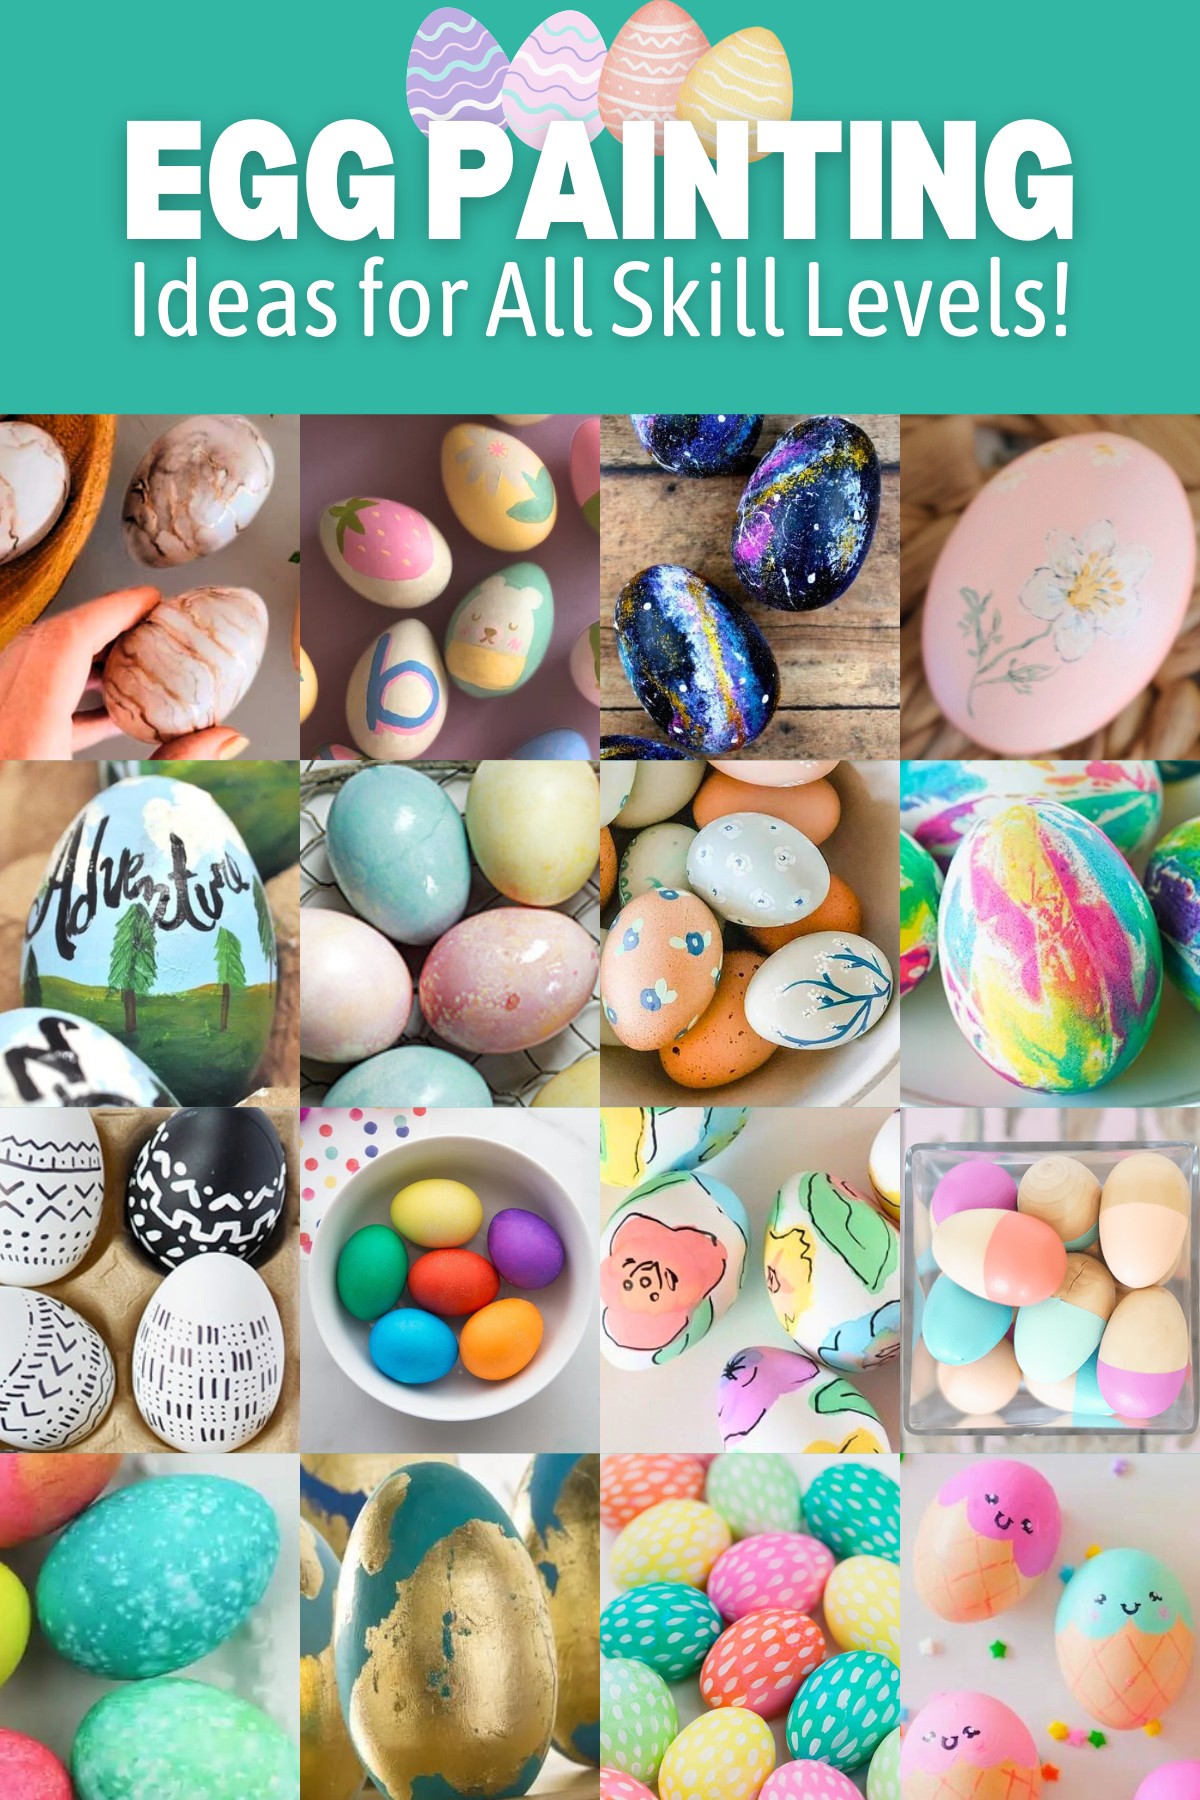 Egg painting Ideas for All Skill Levels